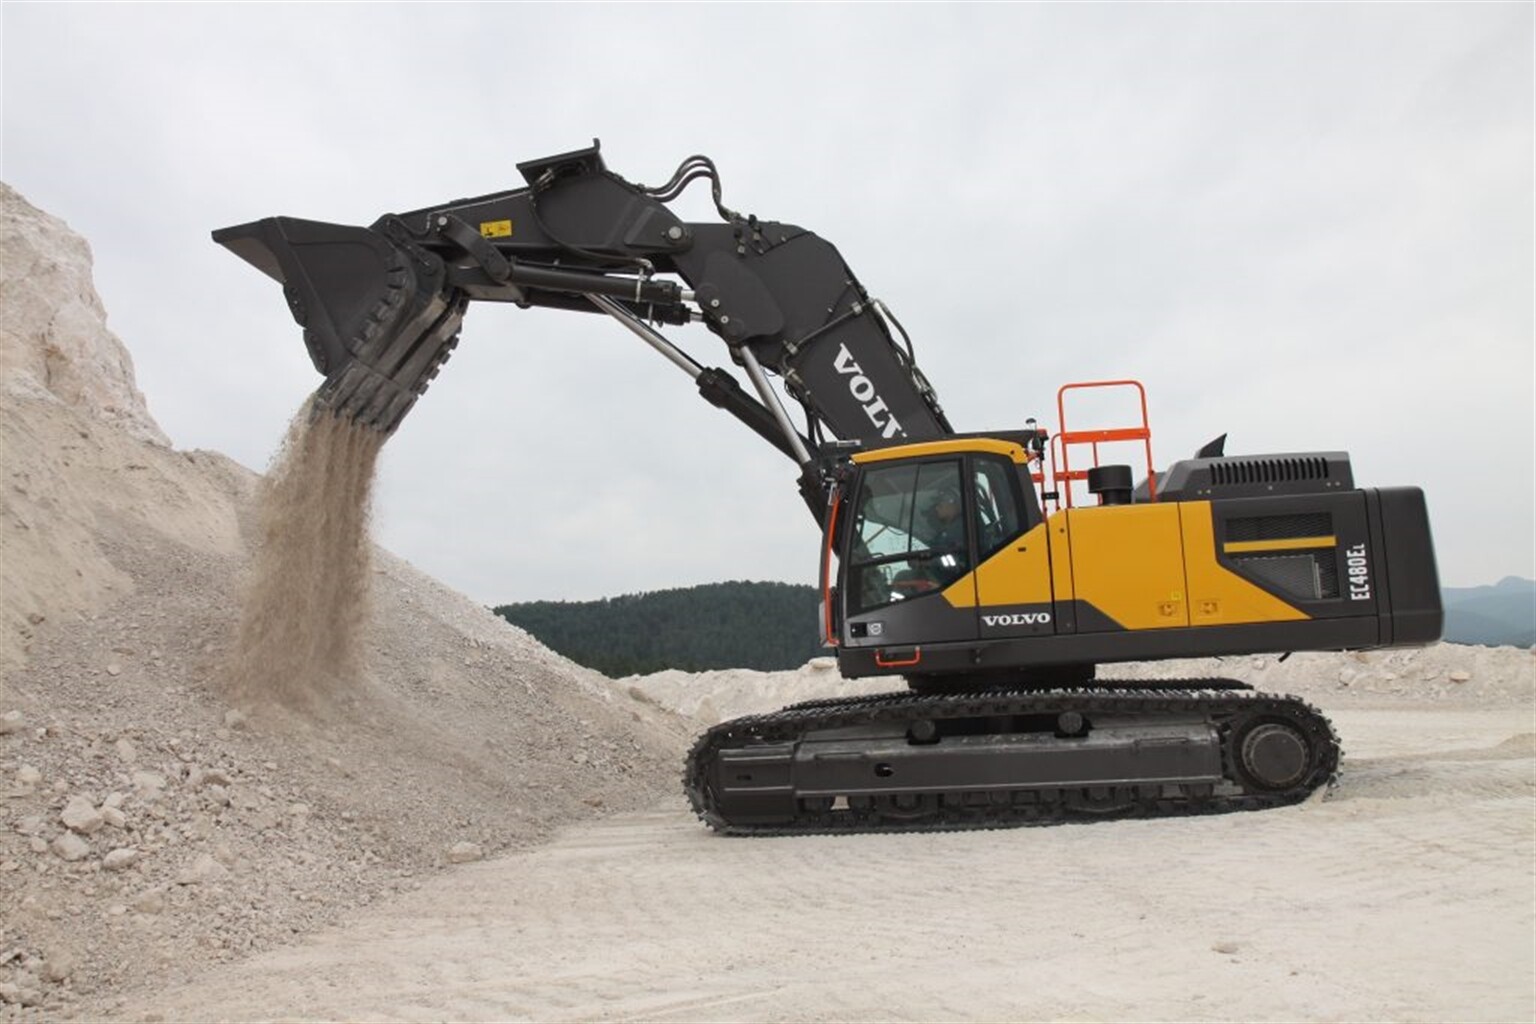 Europe's first Volvo front shovel makes an impact